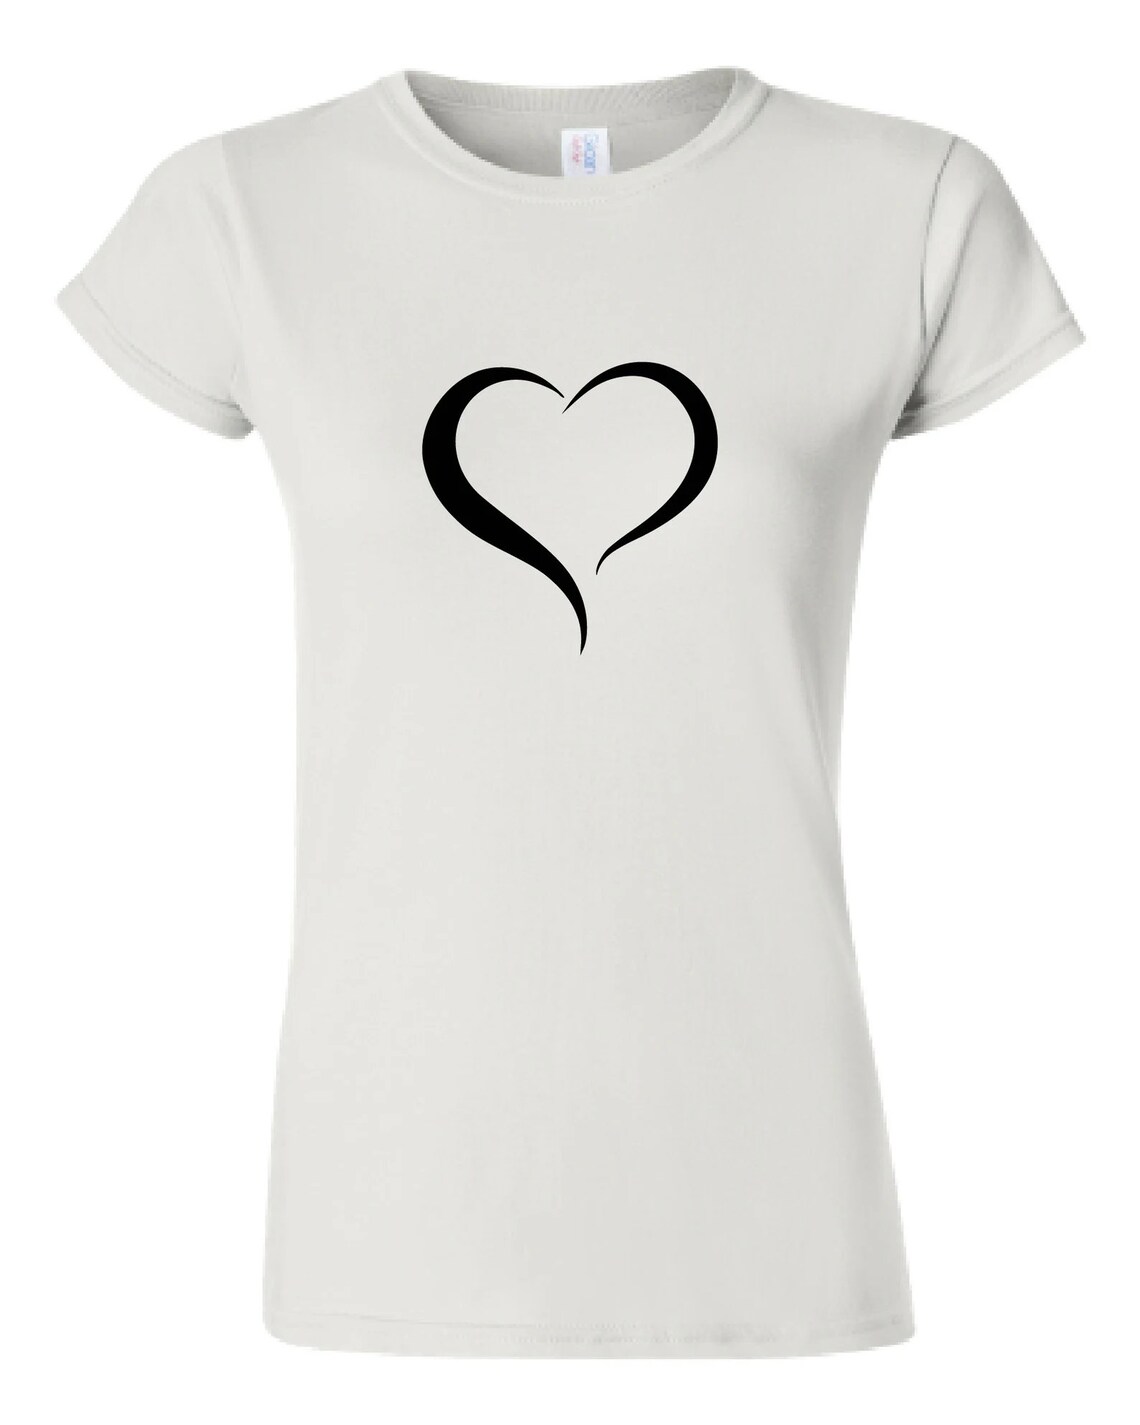 Open Heart 10 Instant Downloads in Black & White 2-SVG, 2-PNG, 2-EPS, 2 ...